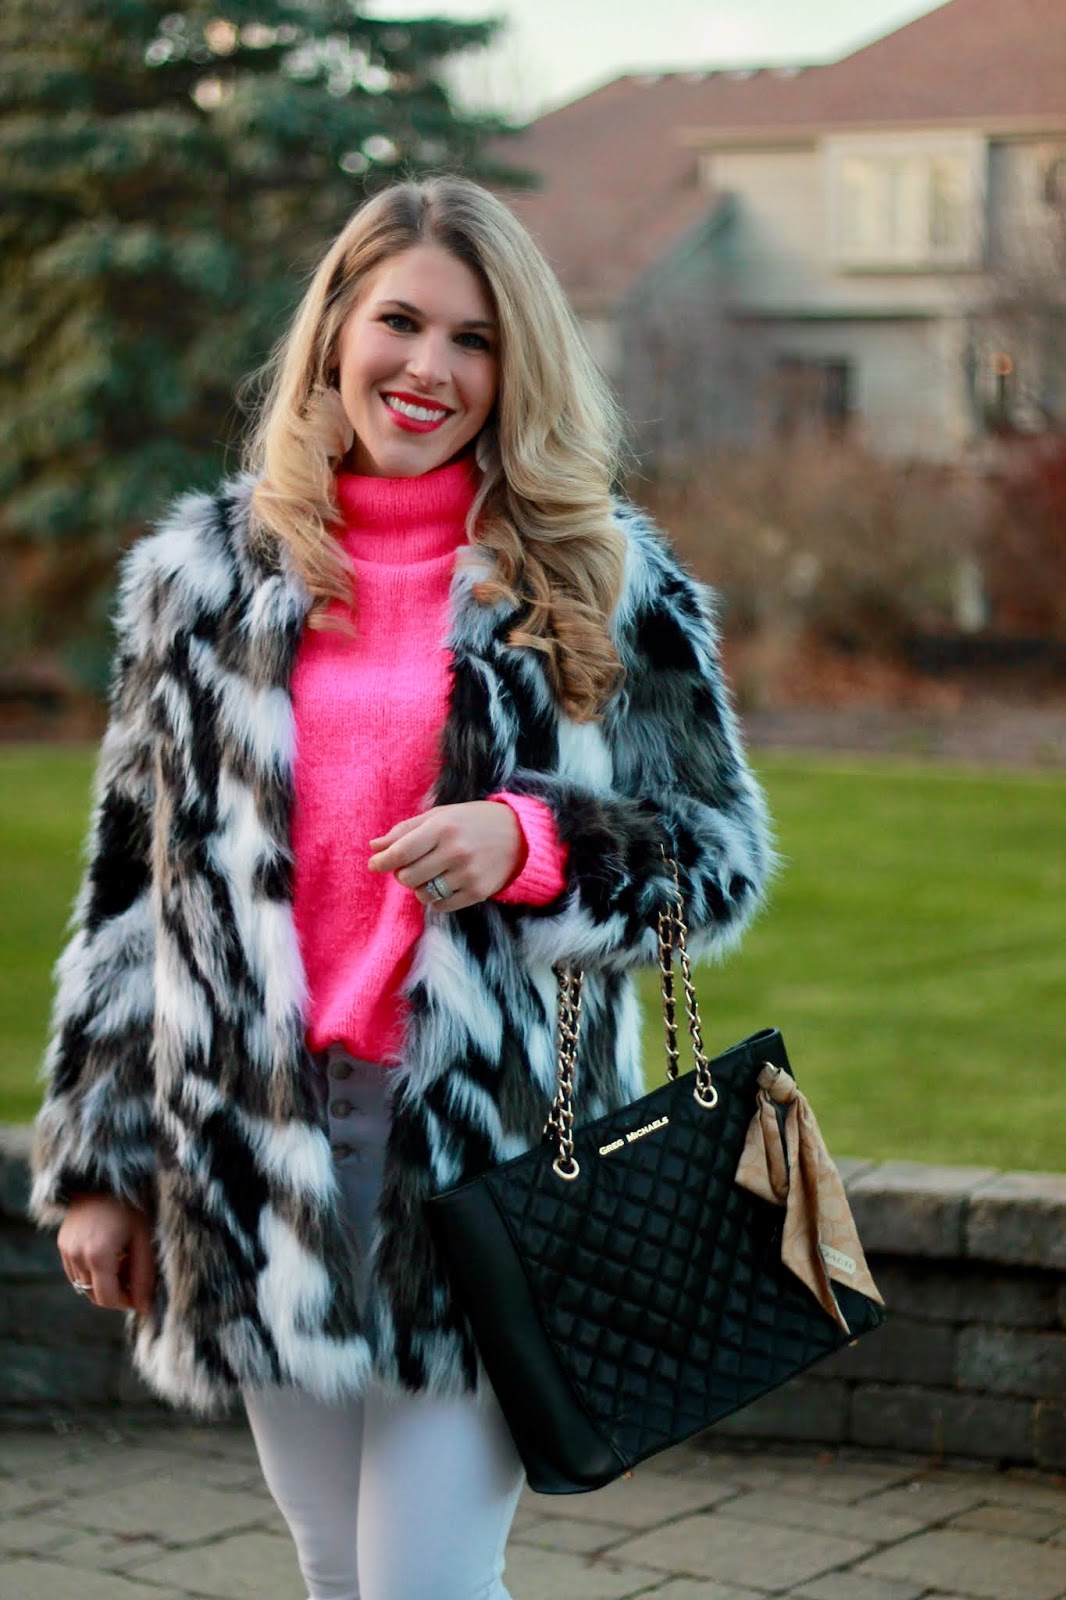 What? Faux Fur Coat Casually? & Confident Twosday Linkup - I do deClaire